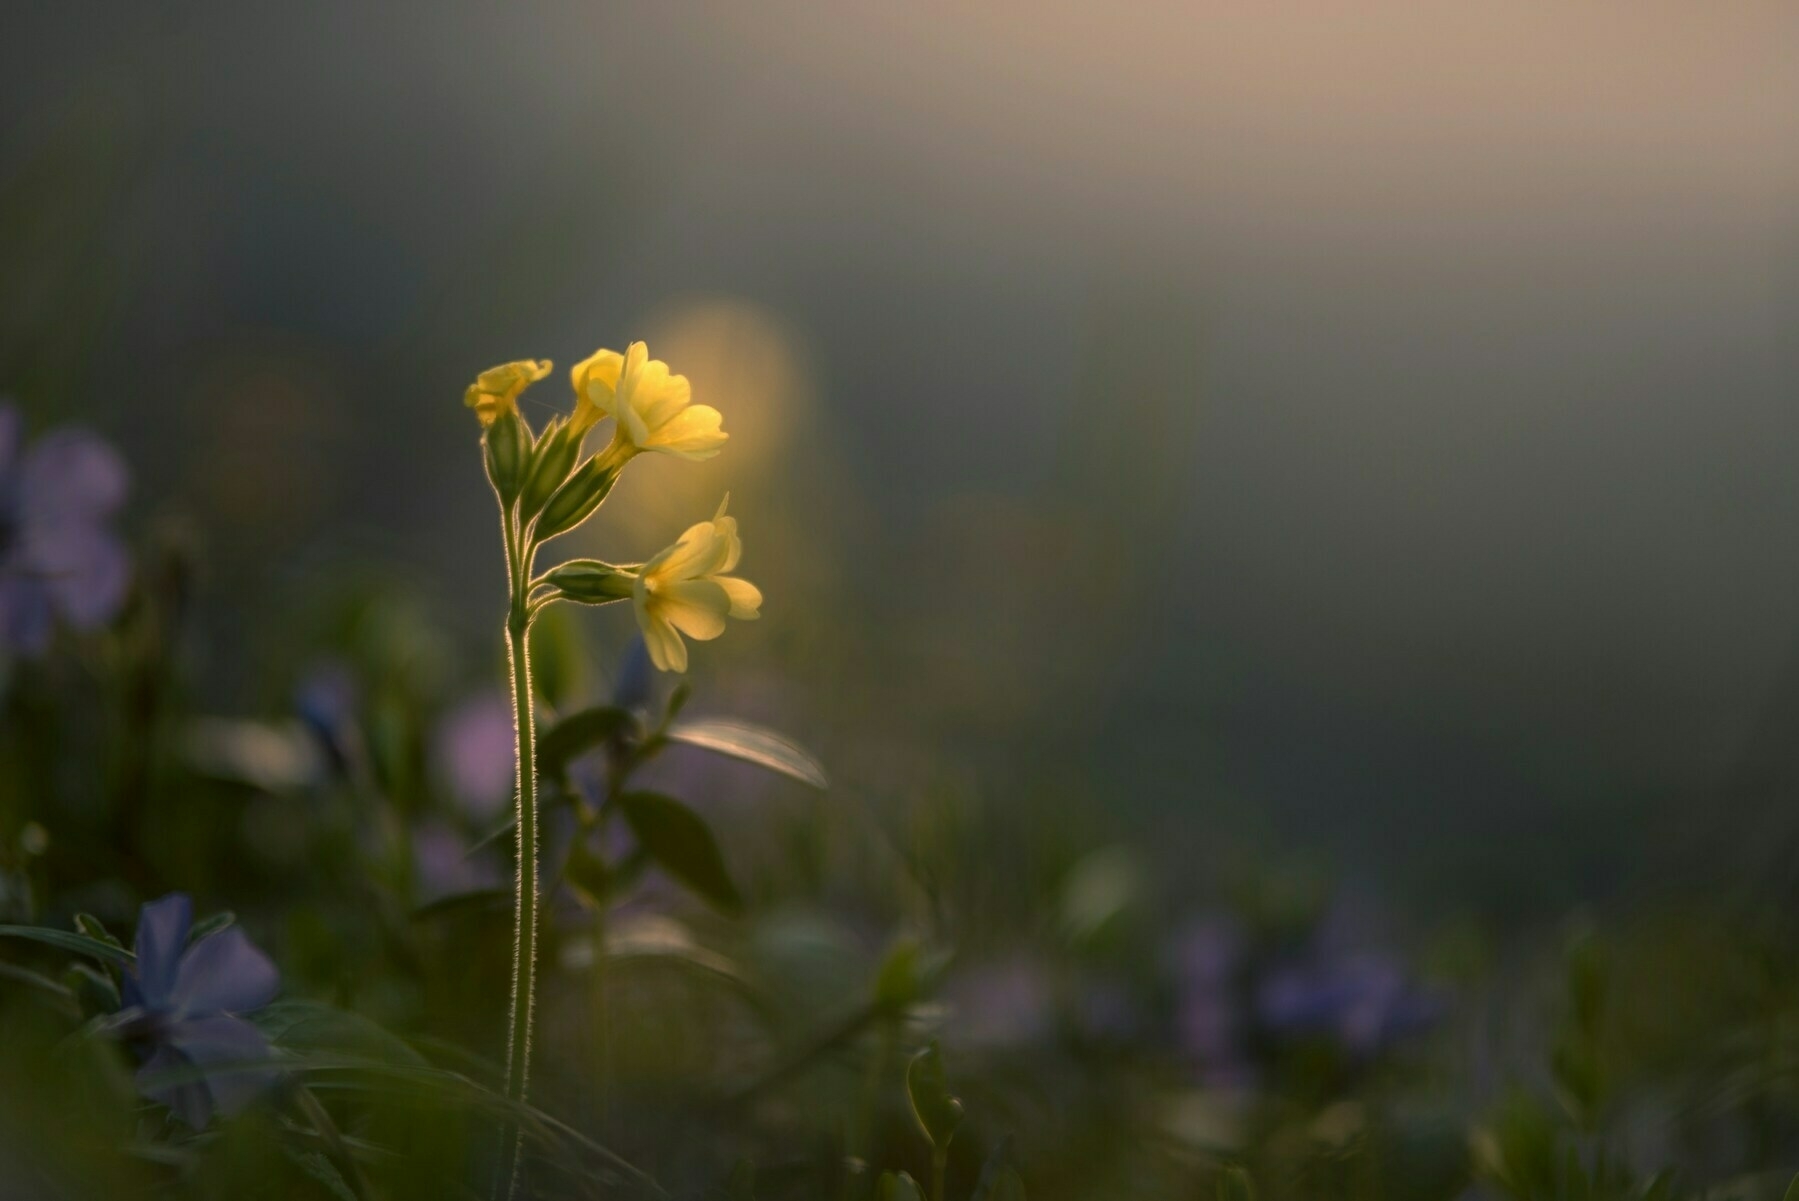 atmospheric picture of a yellow flower in the mist